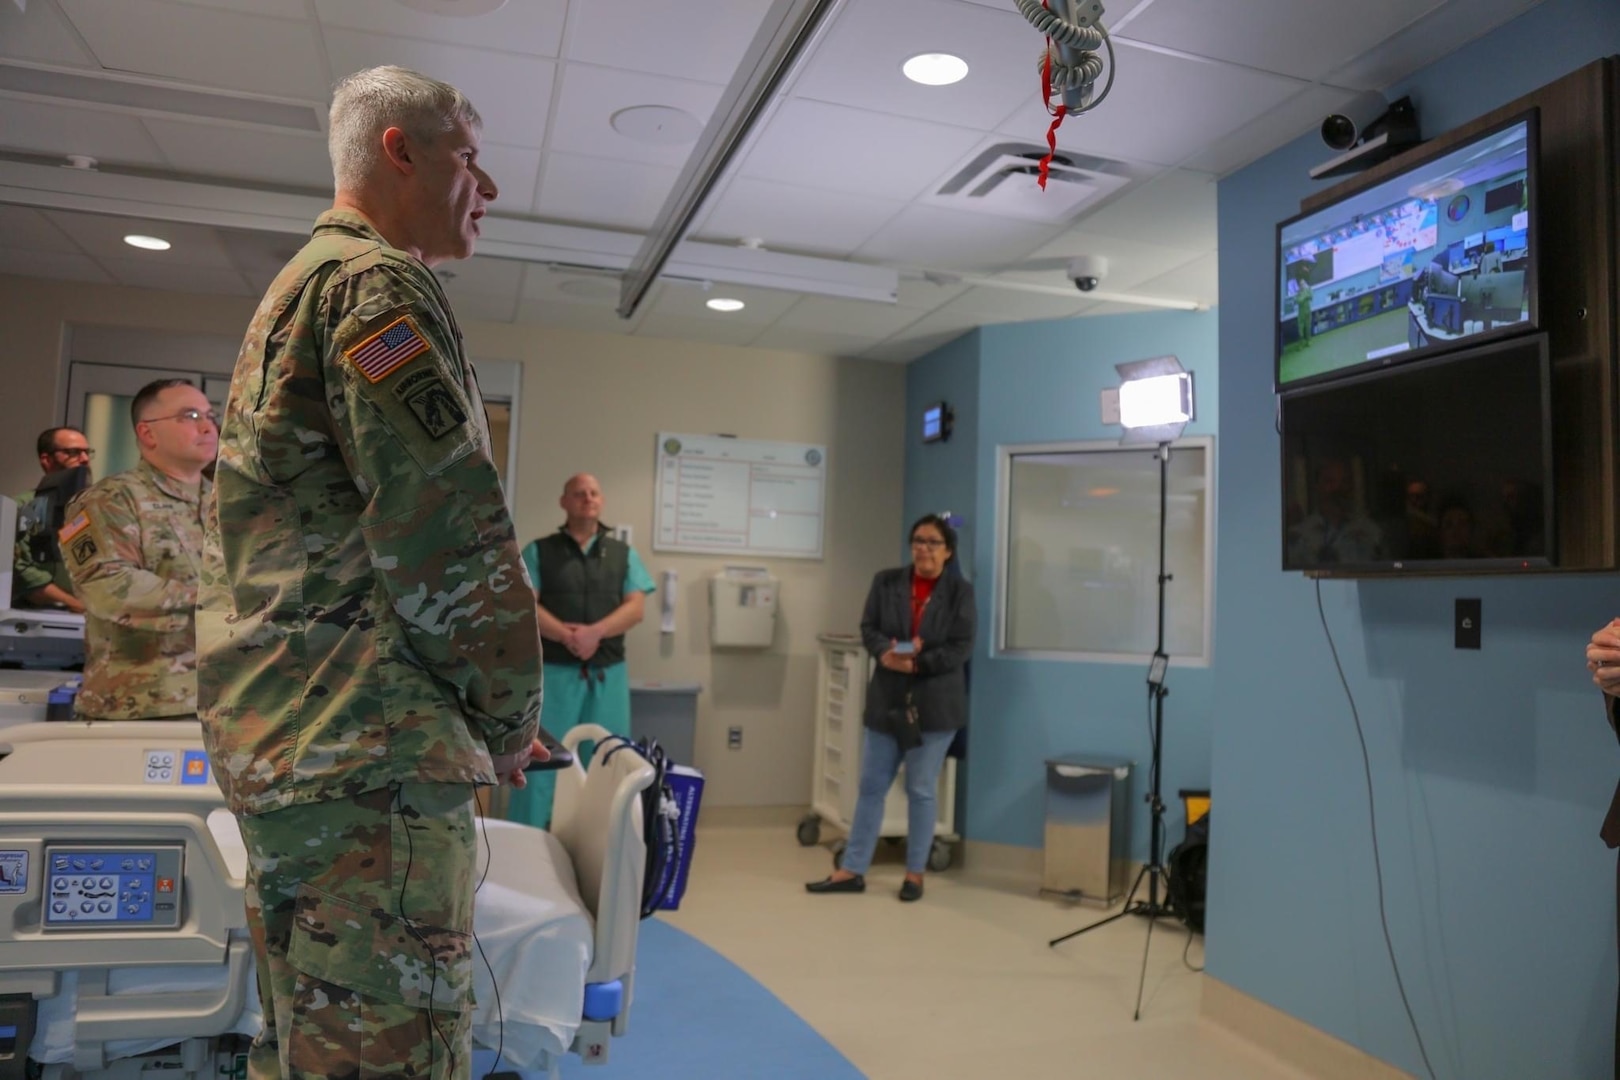 Blanchfield Army Community Hospital is the latest military treatment facility in the Military Health System to join the Defense Health Agency’s Joint Tele-Critical Care Network.

The JTCCN virtually integrates 24/7 access to highly skilled critical care physicians, or intensivists, from DHA medical centers, or “hubs”, like Naval Medical Center San Diego and Brook Army Medical Center, with “satellite” intensive care units at nearly 20 military treatment facilities worldwide.